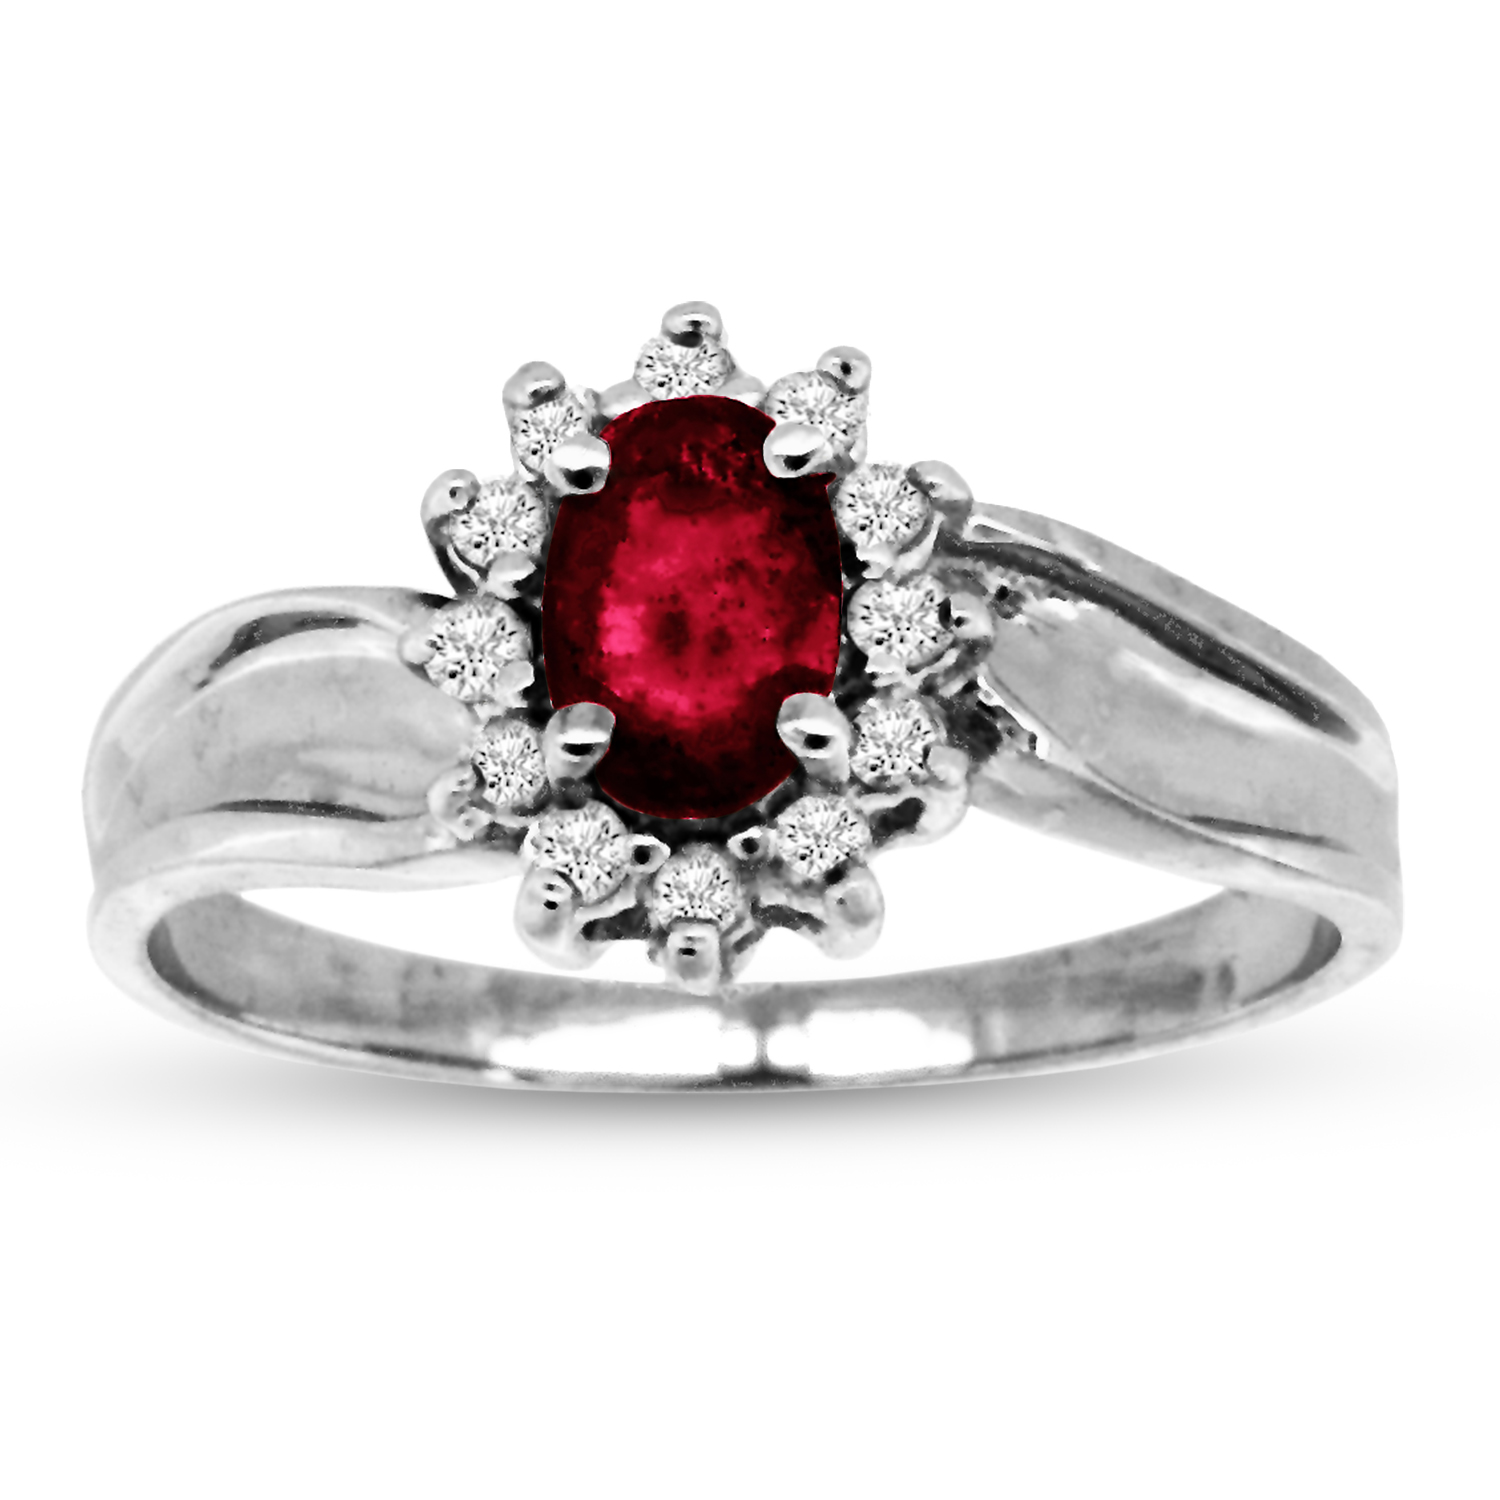 0.67cttw Natural Heated Ruby and Diamond Fashioon Ring set in 14k Gold